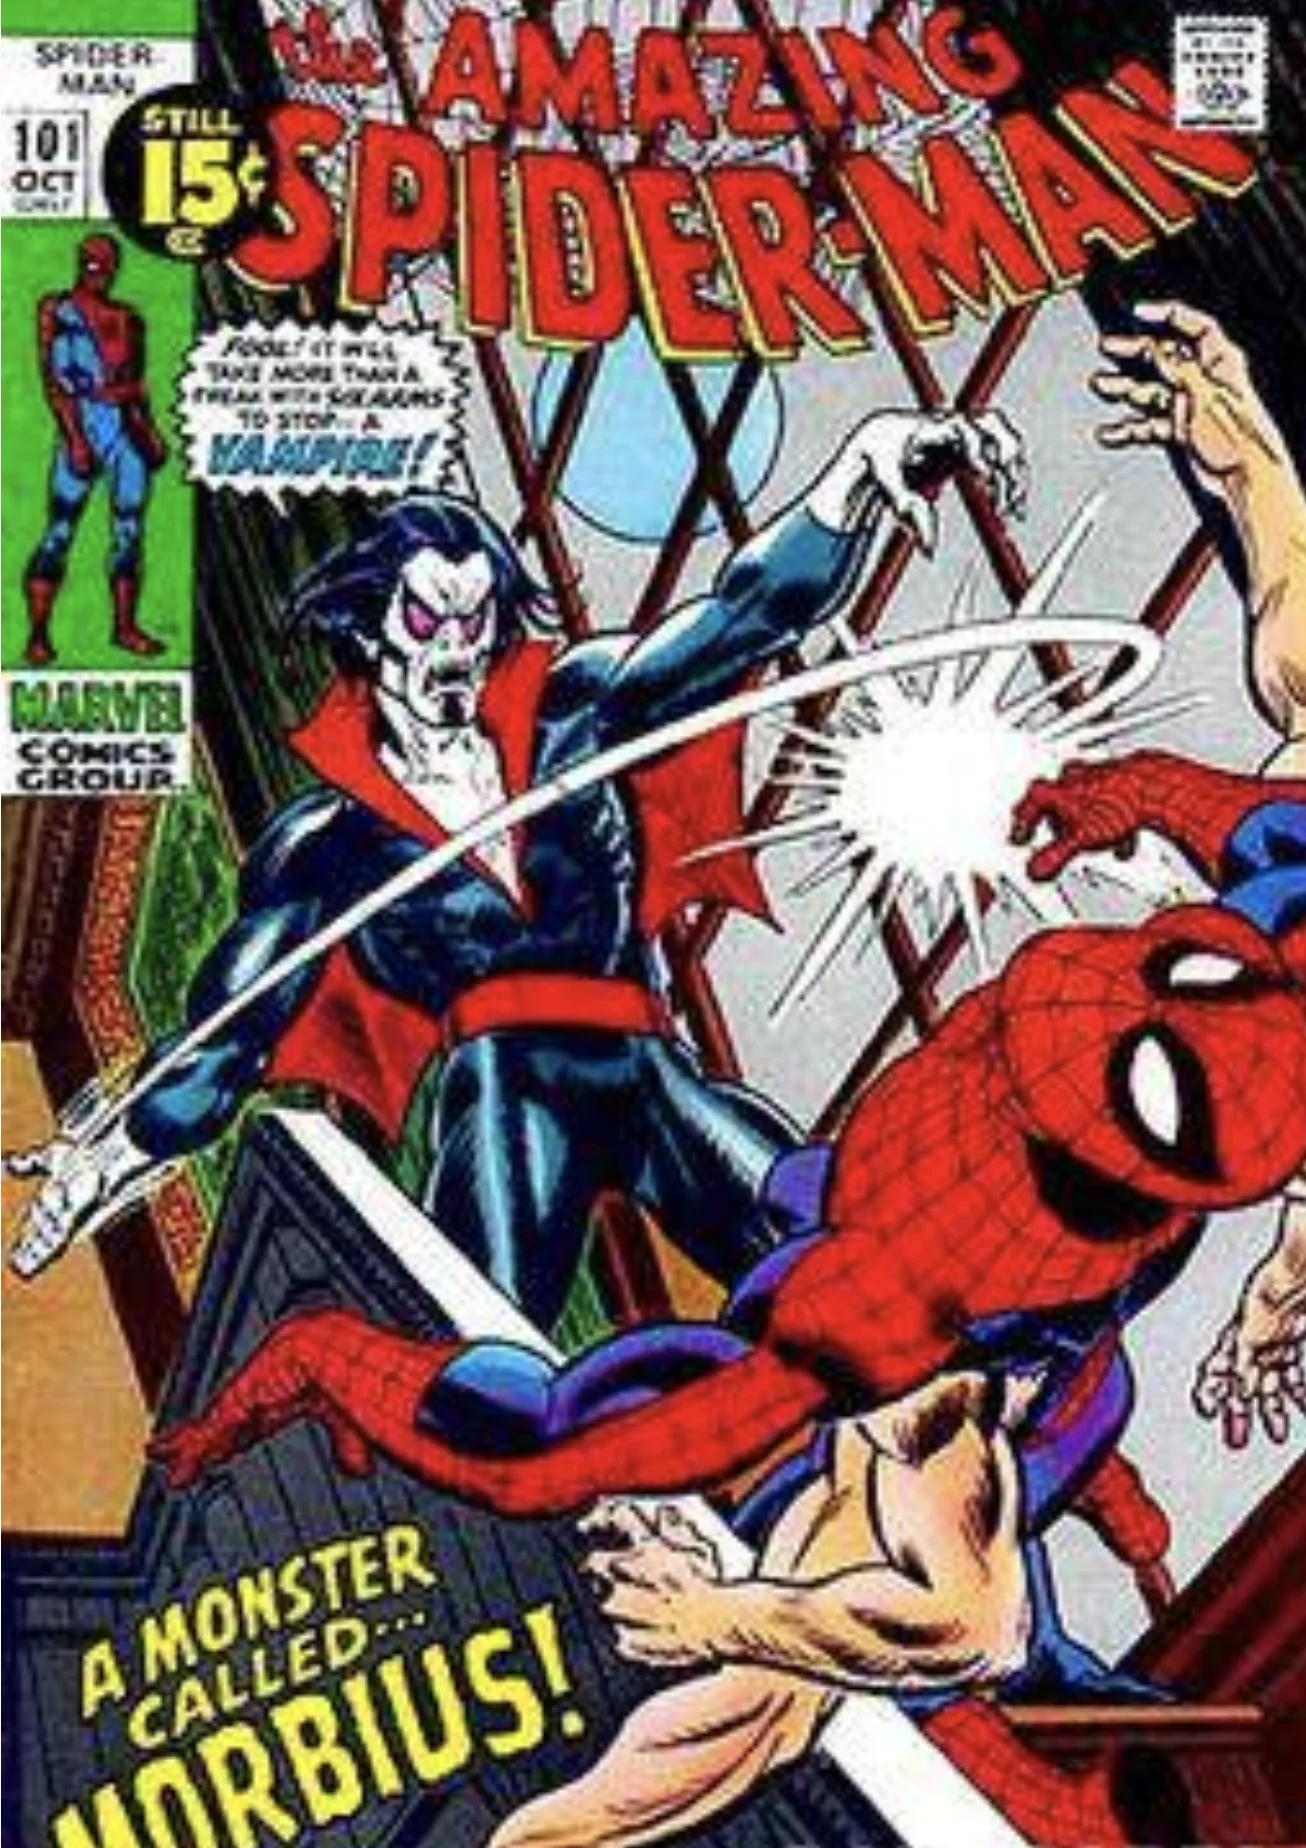 Where did Morbius in the Spider-Man universe come from